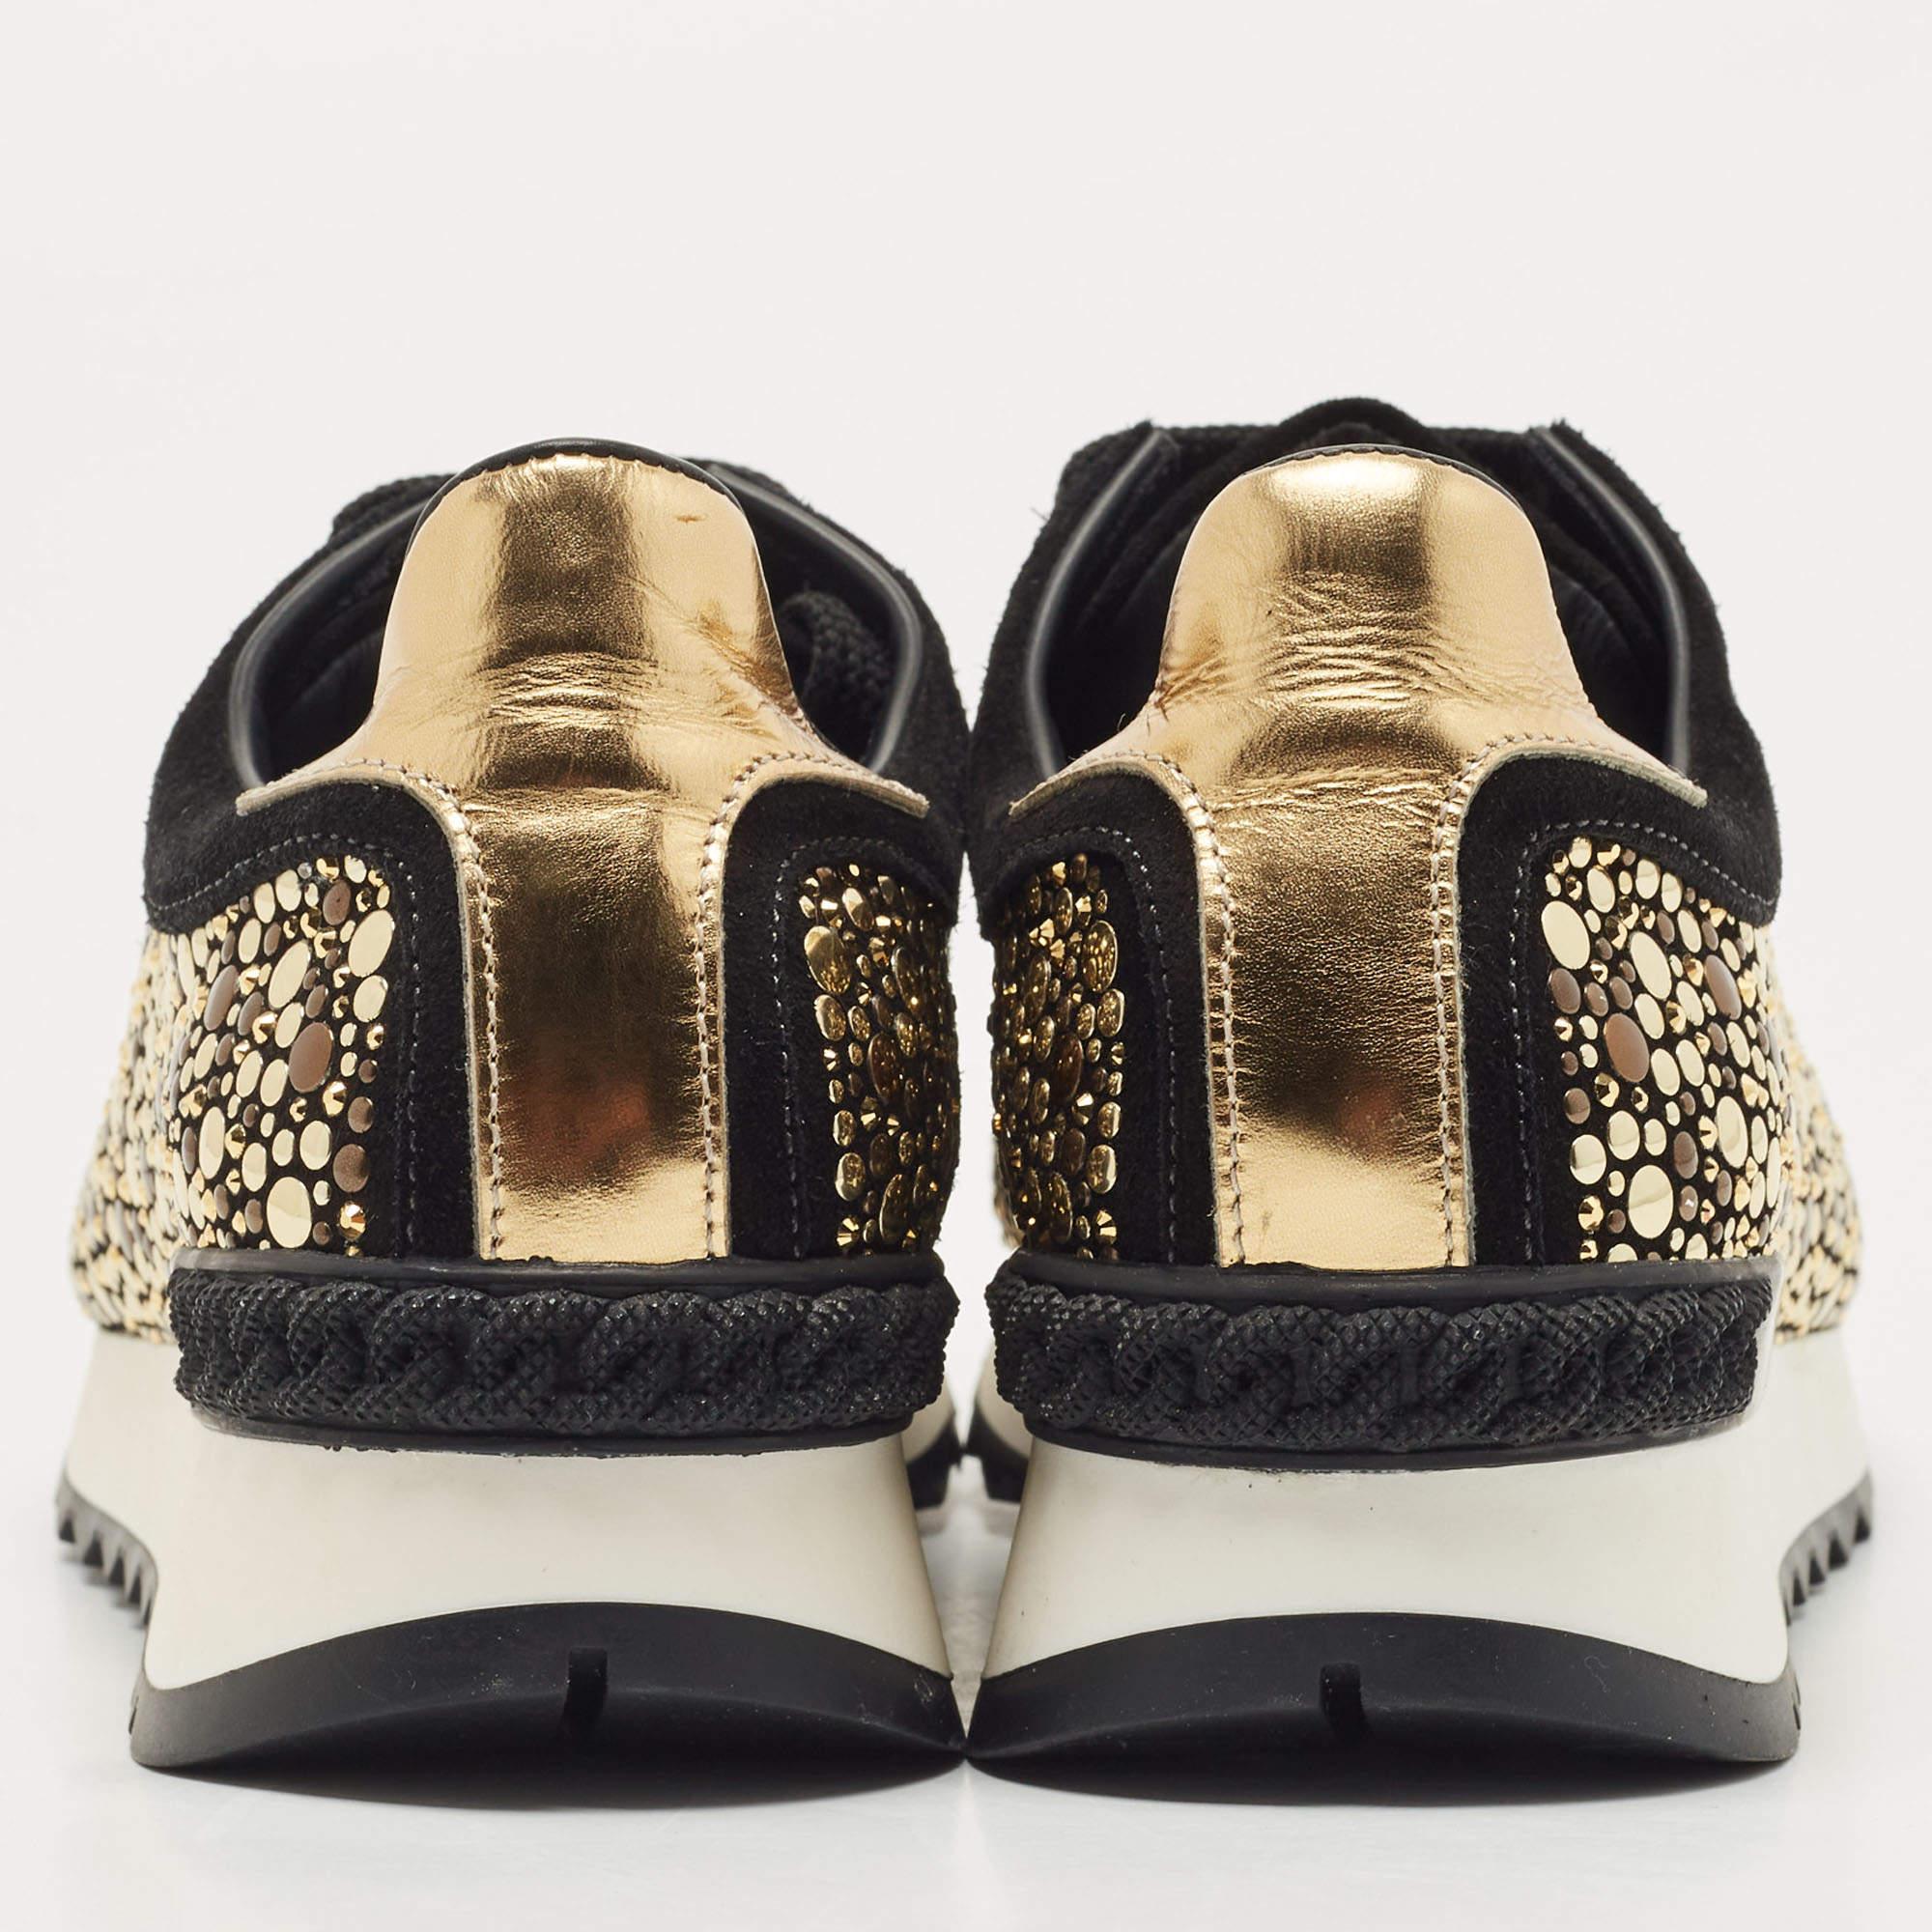 Casadei Black/Gold Suede and Leather Studded Low Top Sneakers Size 37 In New Condition For Sale In Dubai, Al Qouz 2